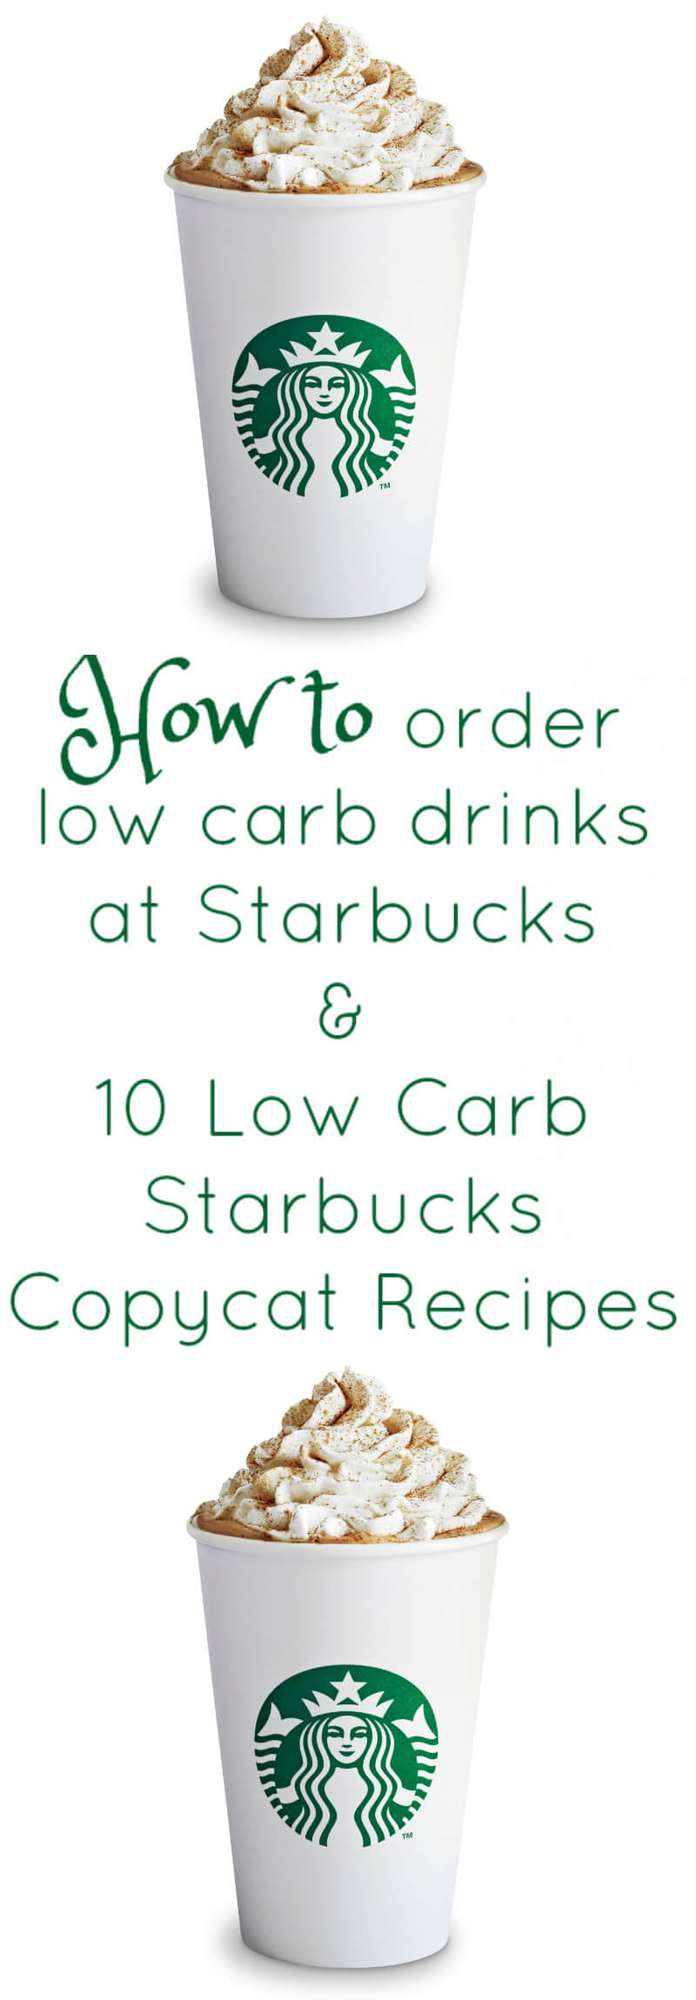 How to Order Low Carb / Keto at Starbucks and 10 Low Carb Starbucks Copycat Recipes